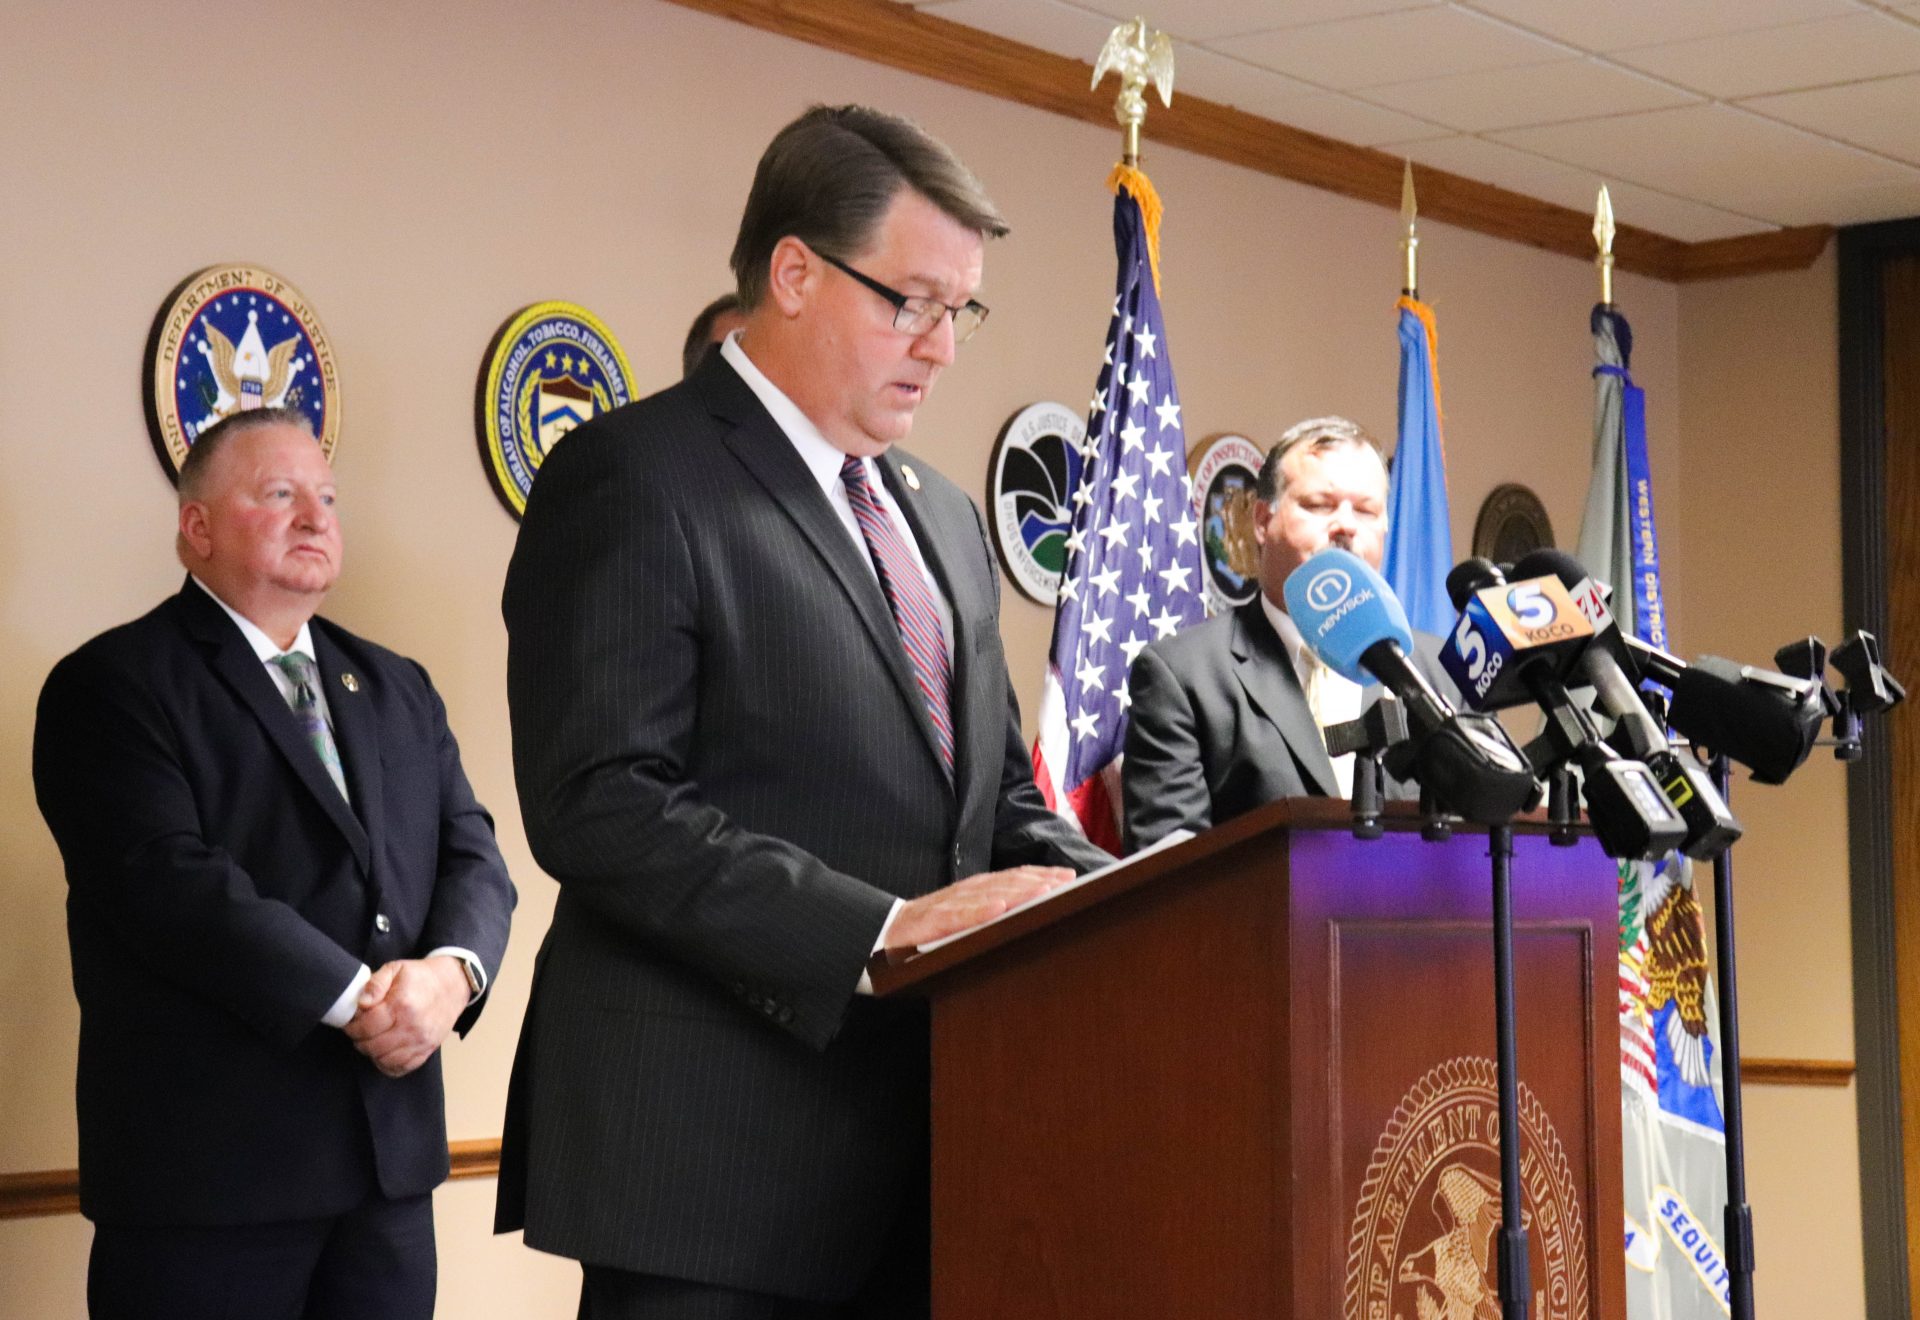 Acting U.S. Attorney Bob Troester announces indictments in a conference room at the U.S. Attorney's Office for the Western District of Oklahoma.